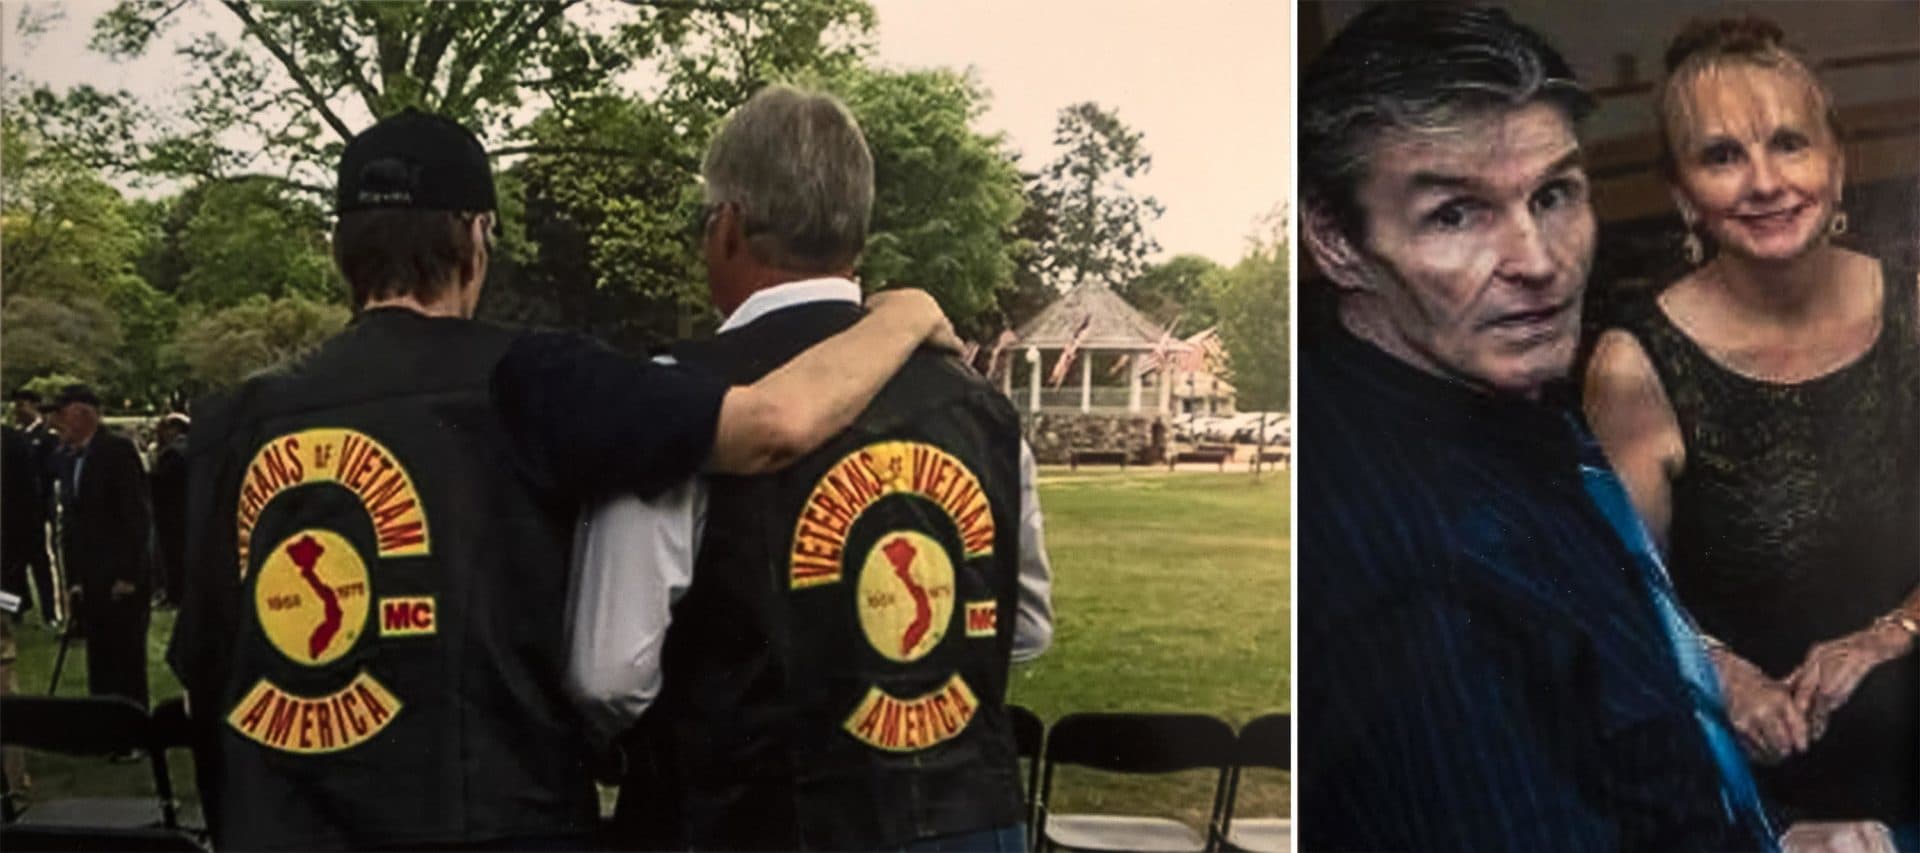 In this composite image, from left to right, Kevin Chamberlain embraces his brother, Joe Chamberlain. In the other image, Kevin is seen with his wife, Susan. (Courtesy Susan Chamberlain)